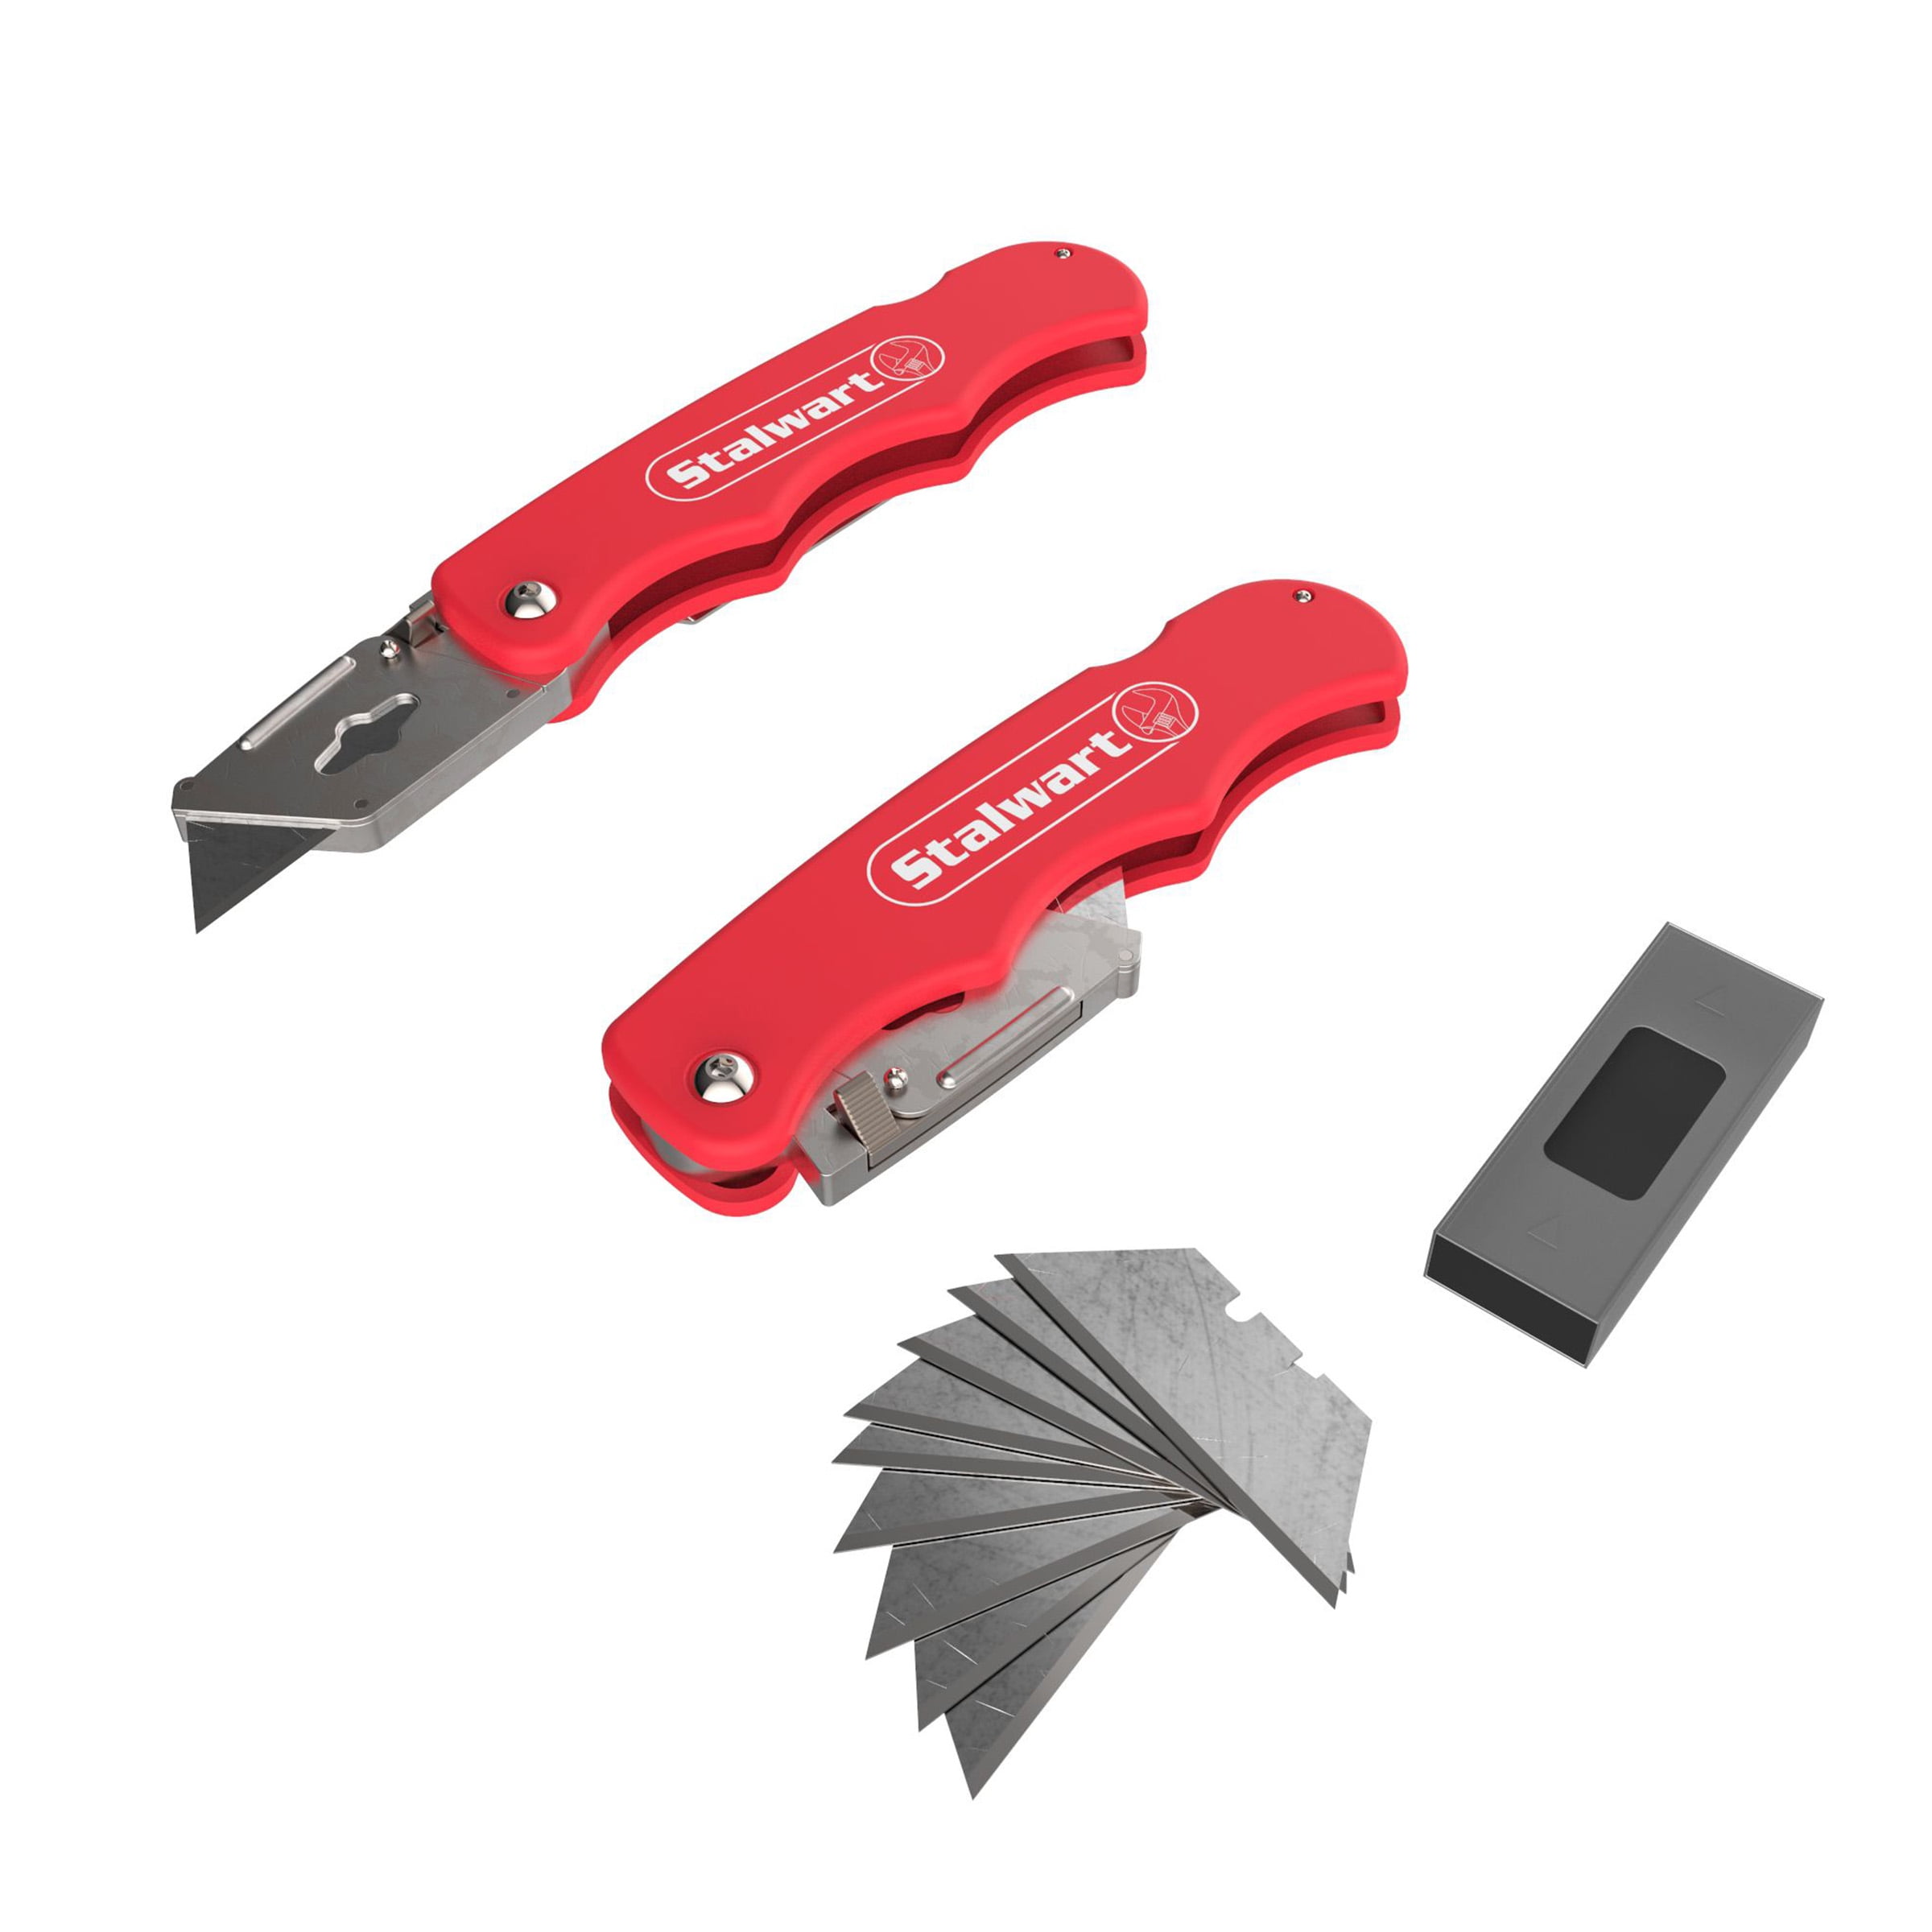 3-Pack Box Cutter Retractable, Utility Knife - 99 Rands